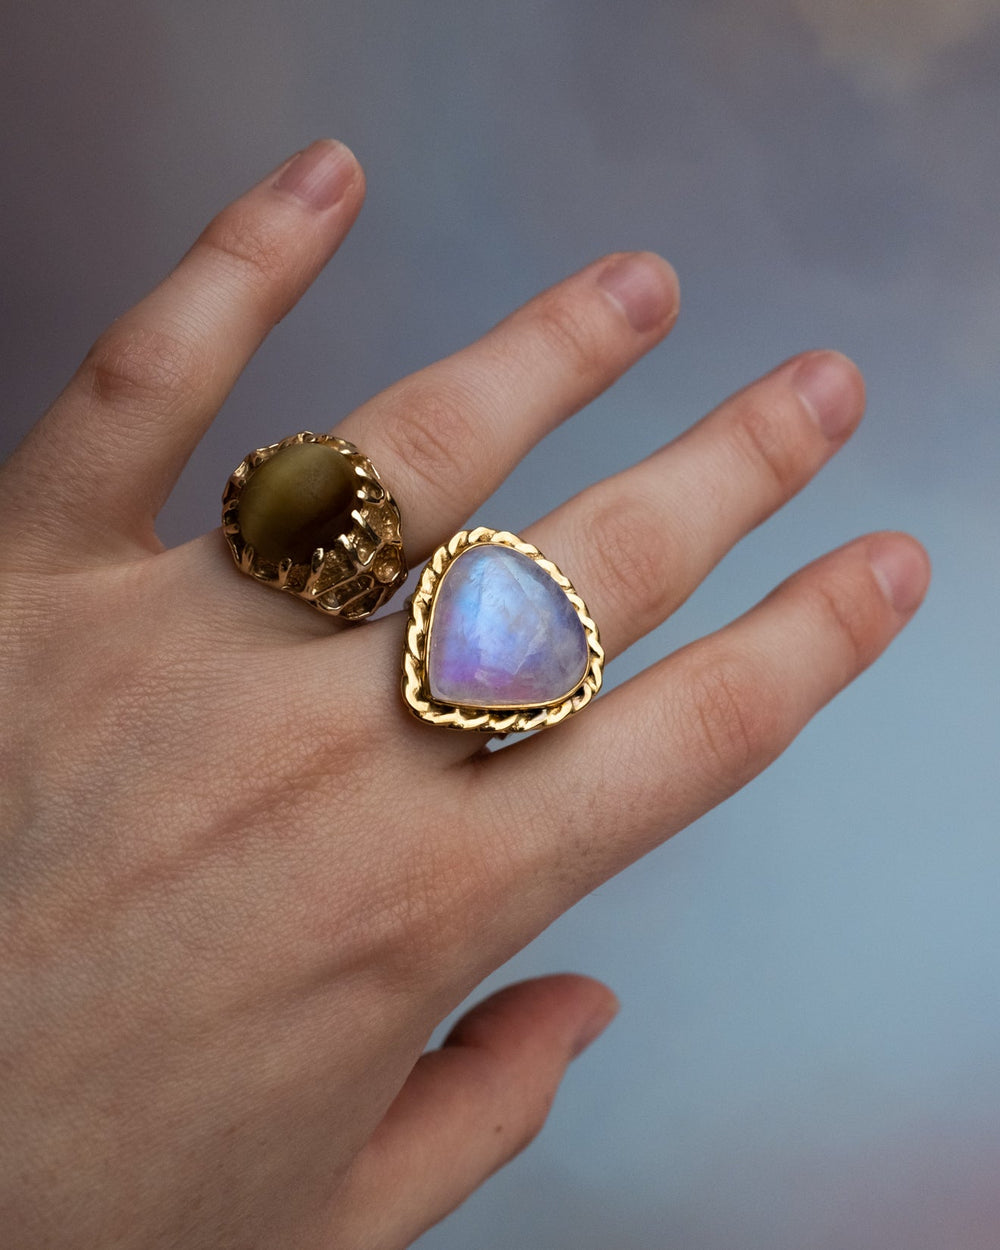 Pink Moonstone Twisted Ring in Gold Vermeil - Size 6 1/2 US / N UK - The Healing Pear